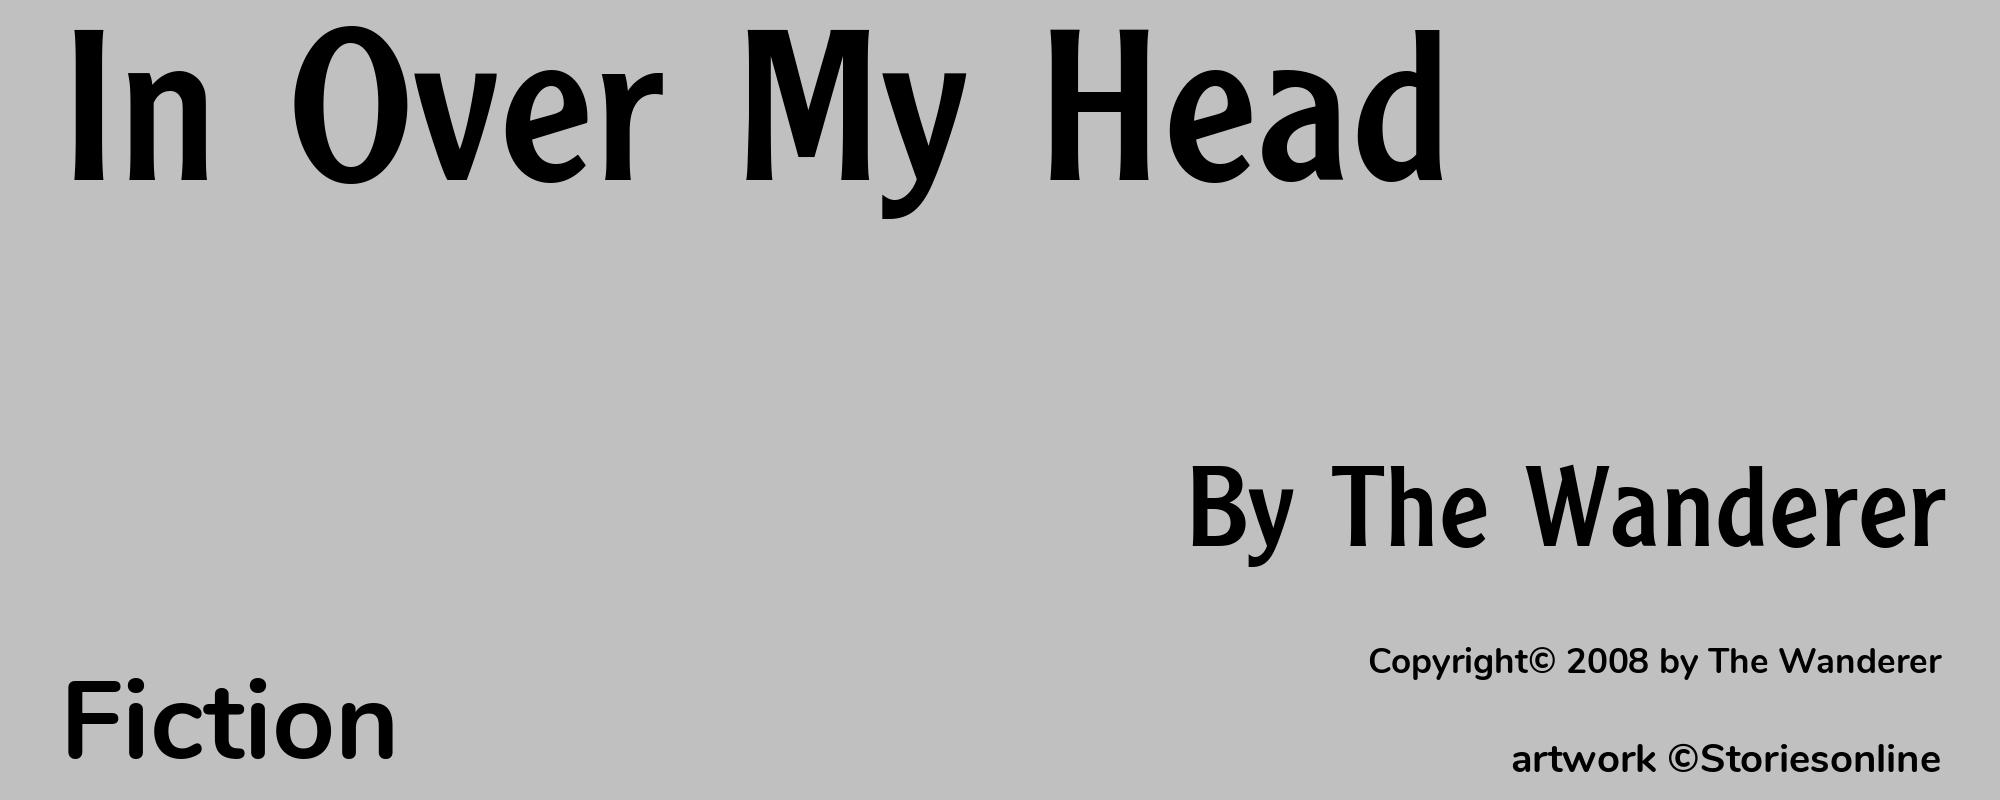 In Over My Head - Cover